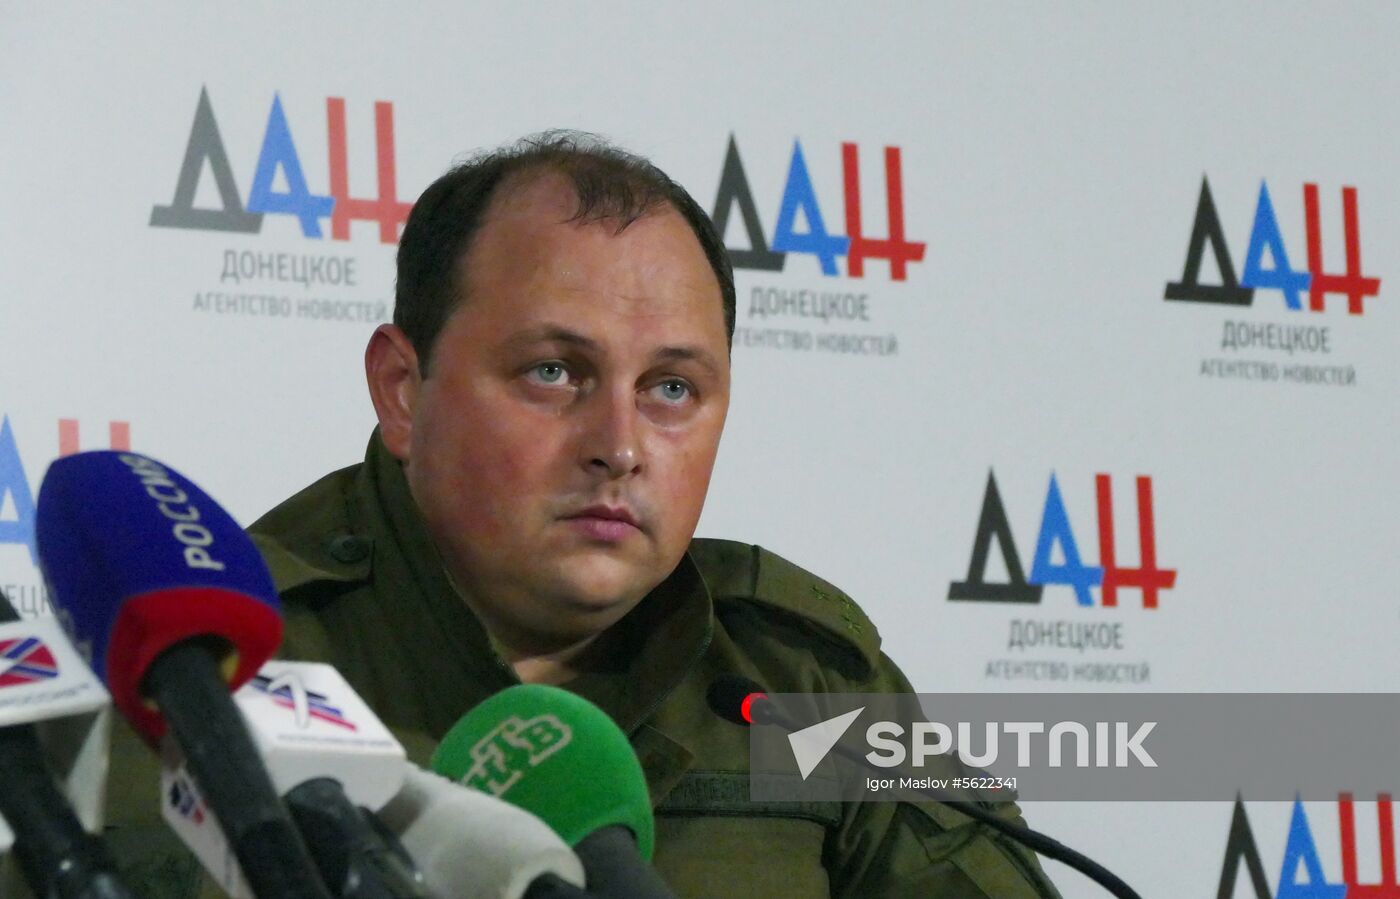 Deputy Prime Minister Dmitry Trapeznikov appointed Acting Head of DPR